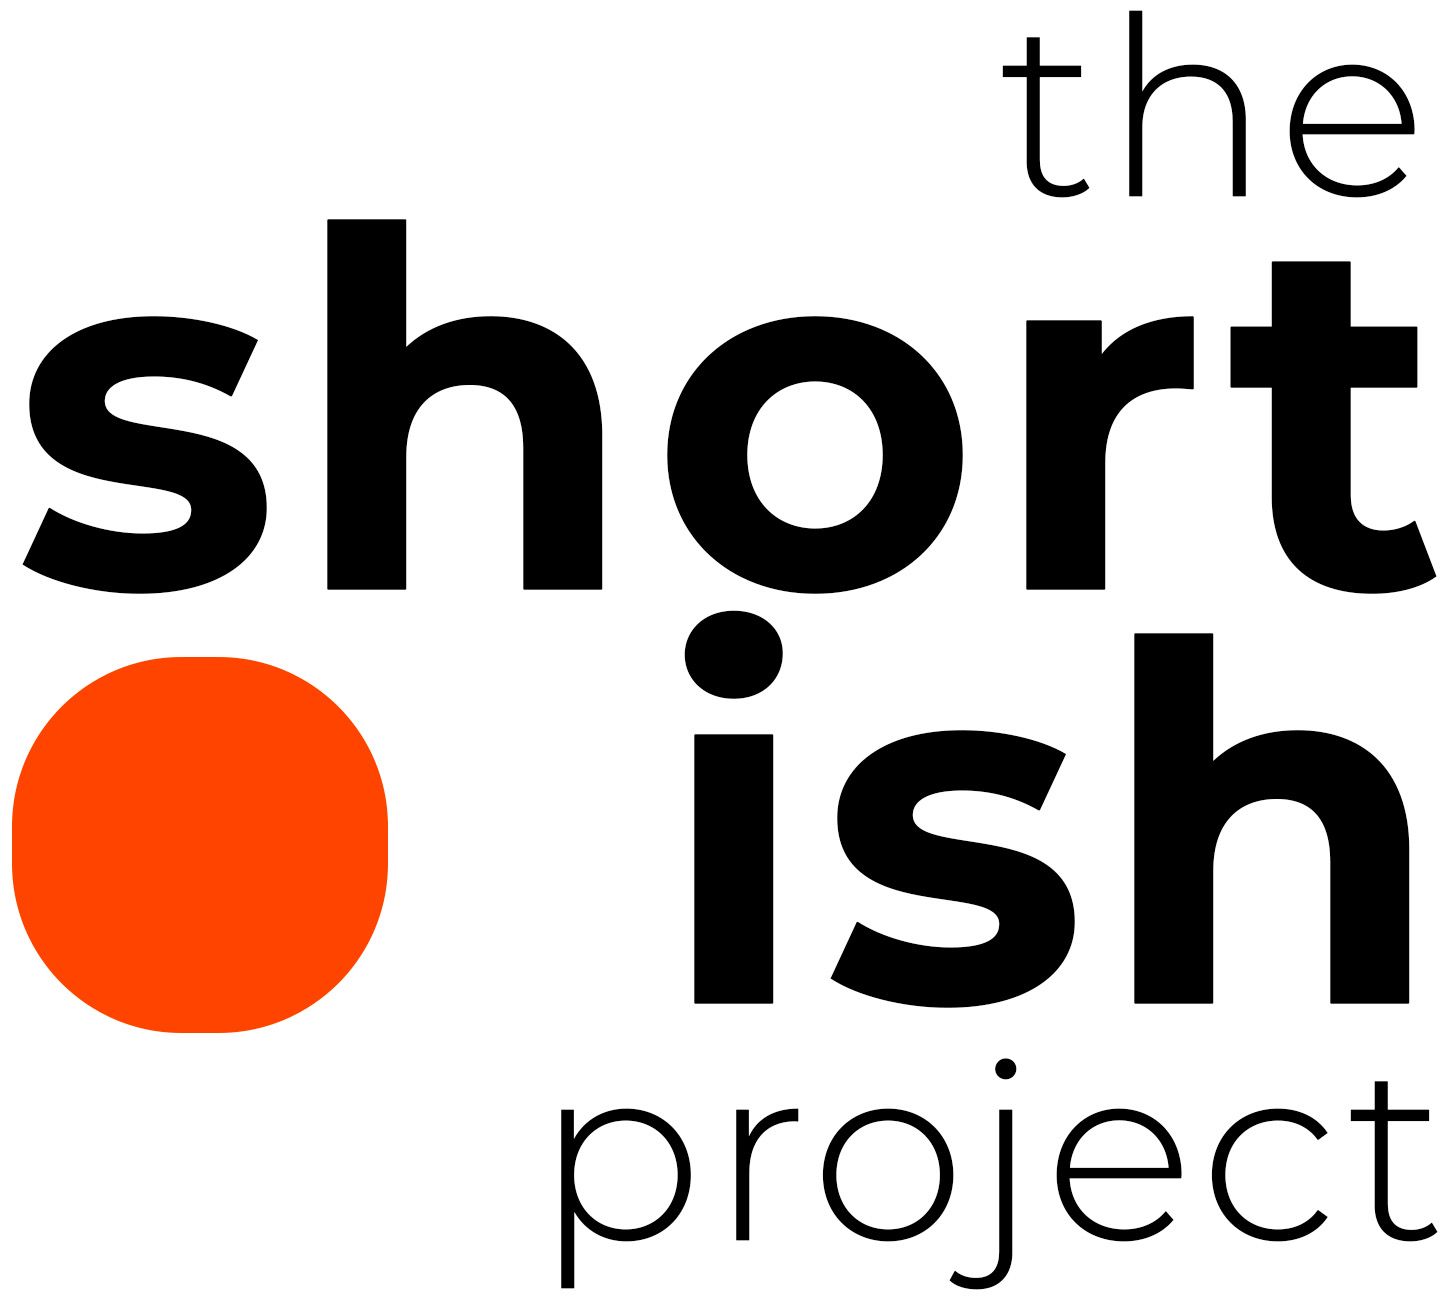 The Shortish Project